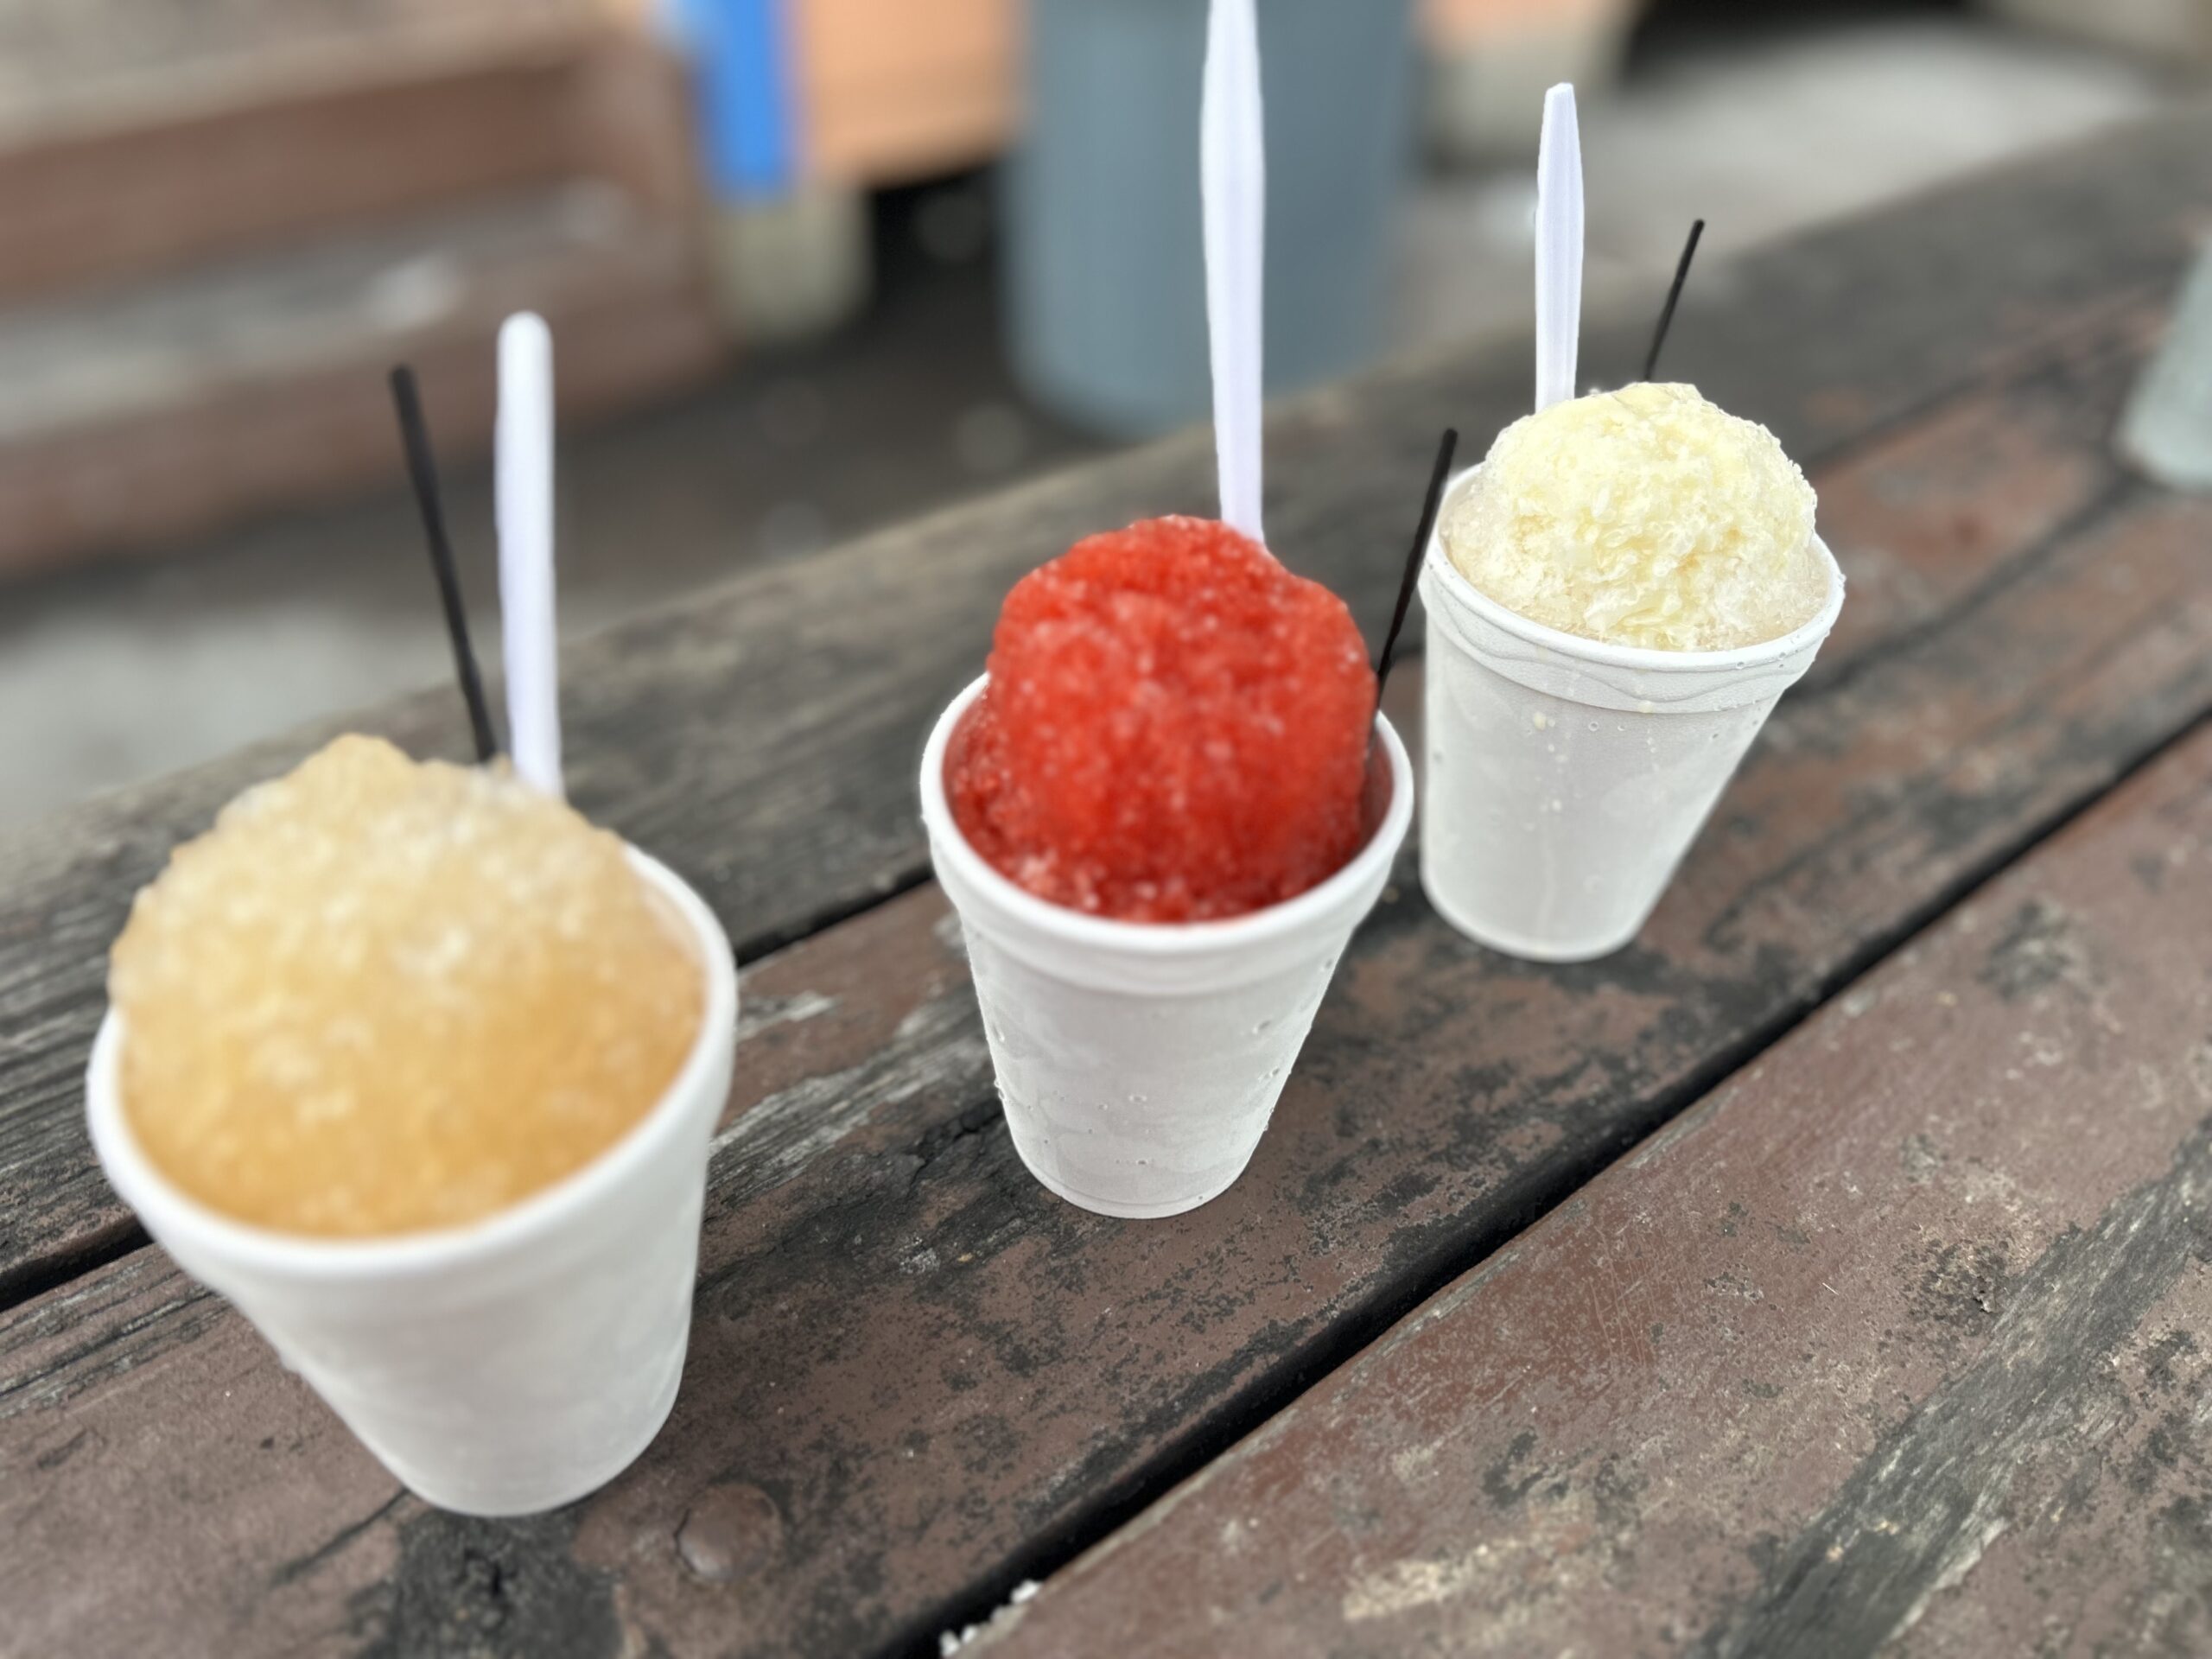 Three styrofoam cups of shaved ice with plastic spoons stuck in them, lined up in a row on a wooden countertop. The shaved ice is light orange, bright red, and light yellow.